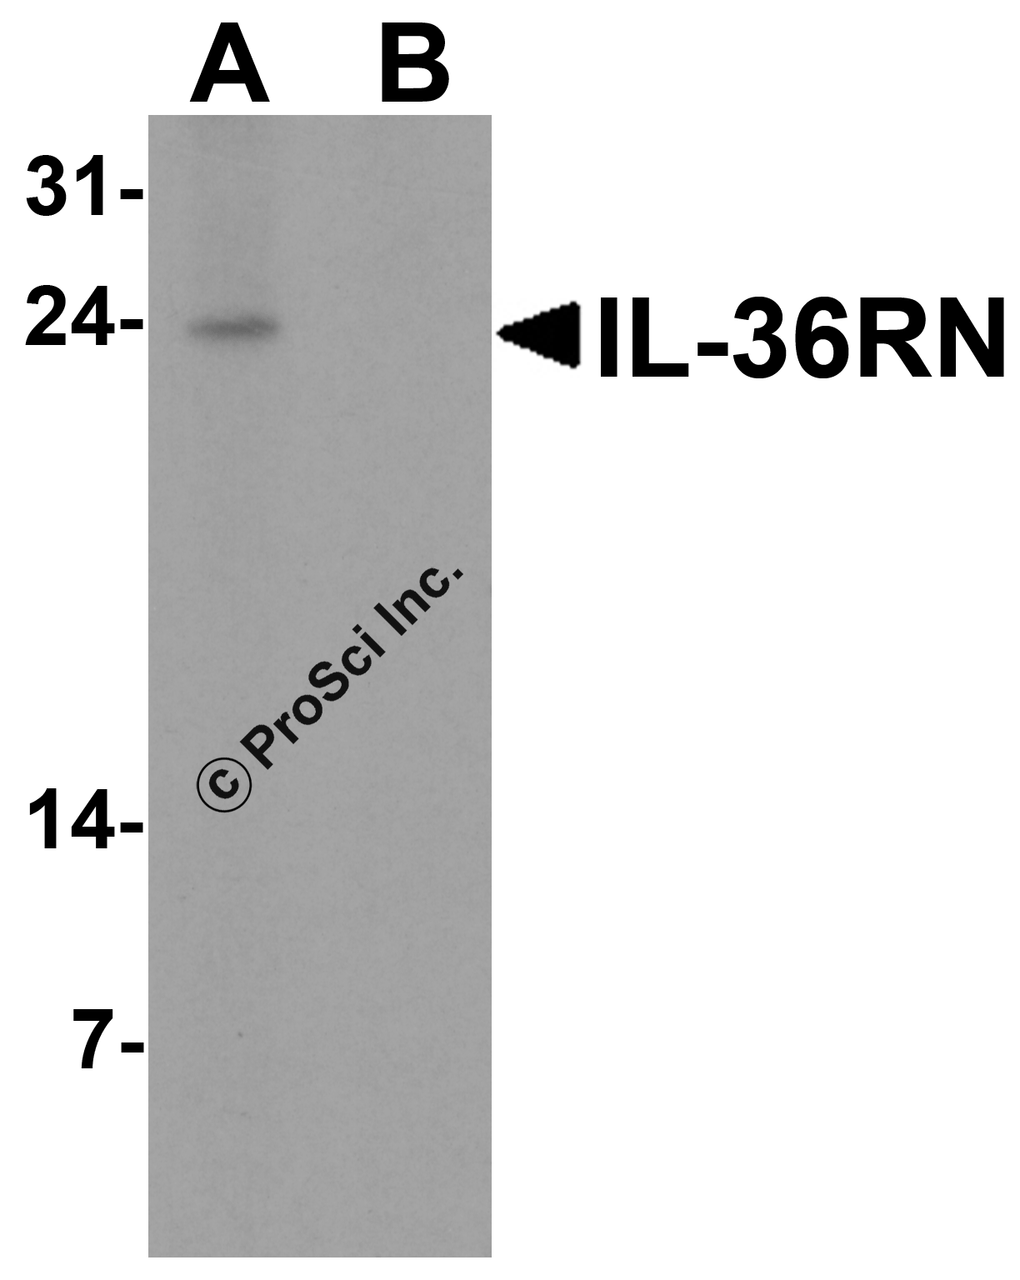 Western blot analysis of IL-36RN in human spleen tissue lysate with IL-36RN antibody at 1 &#956;g/ml in (A) the absence and (B) the presence of blocking peptide.